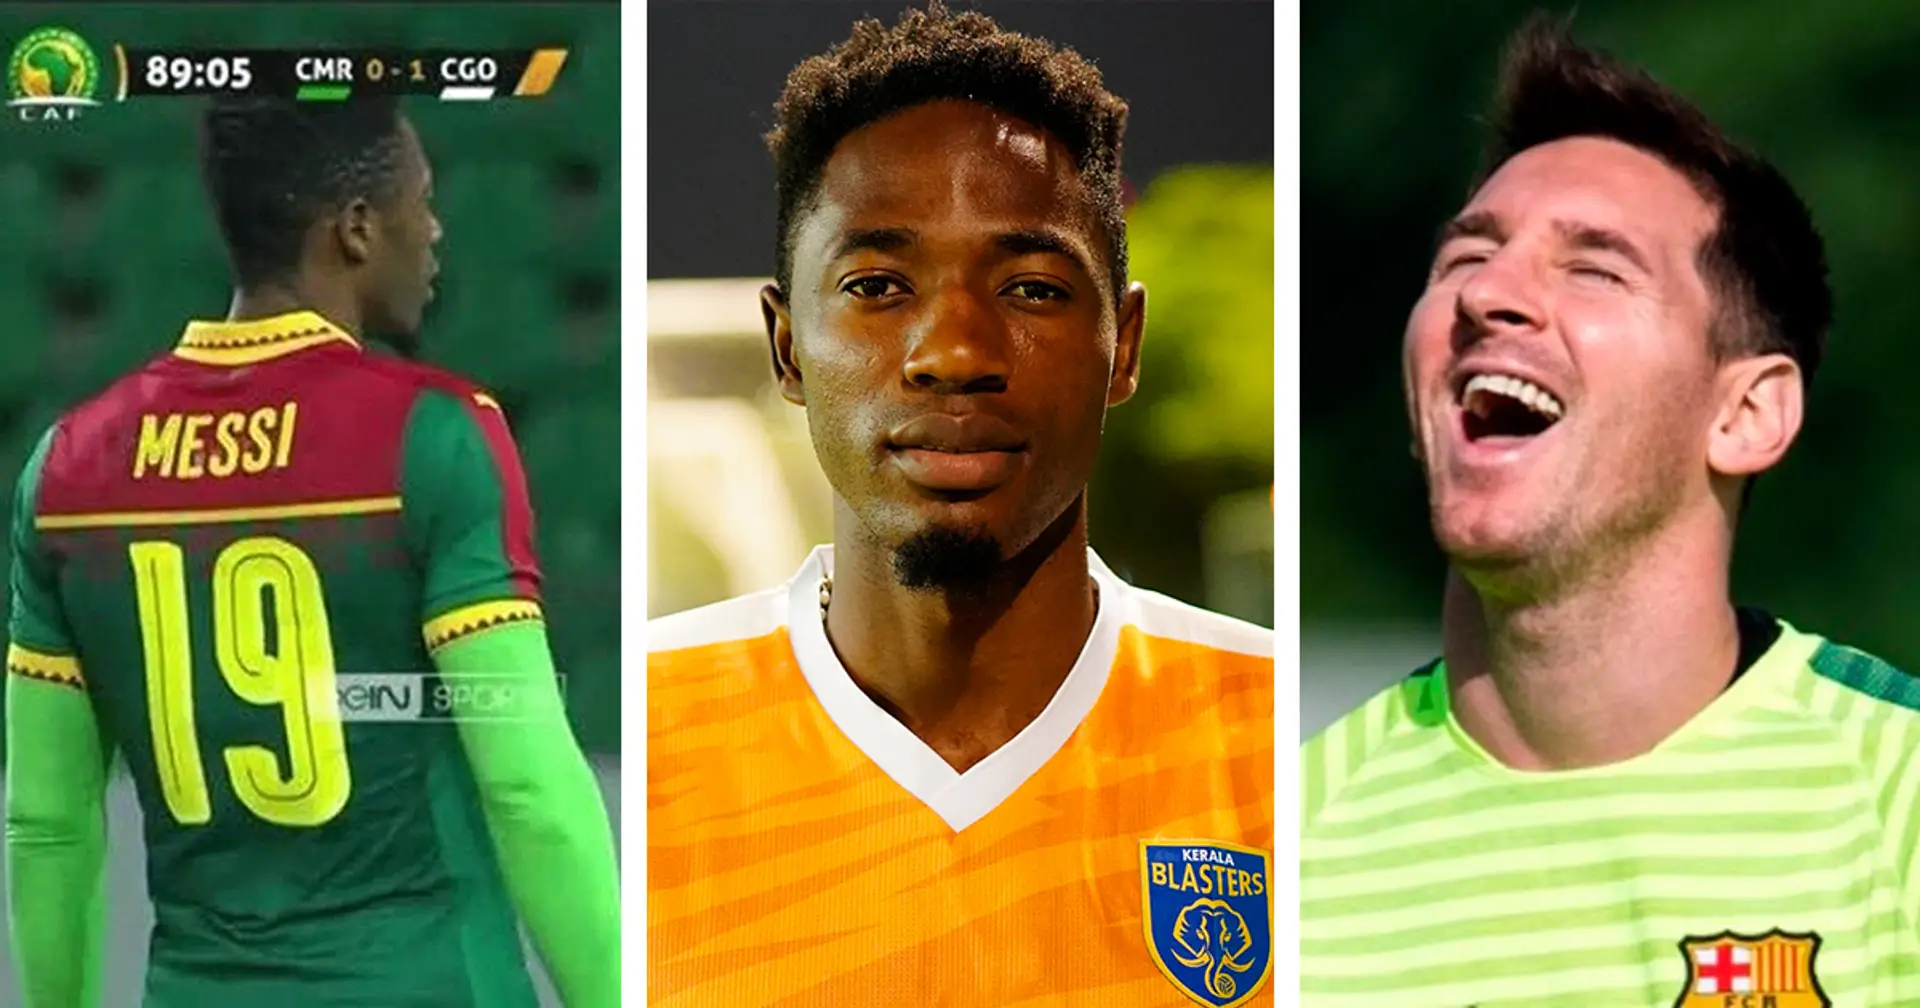 'They always expect more from me!': Hilarious story of Cameroon forward Raphael Messi